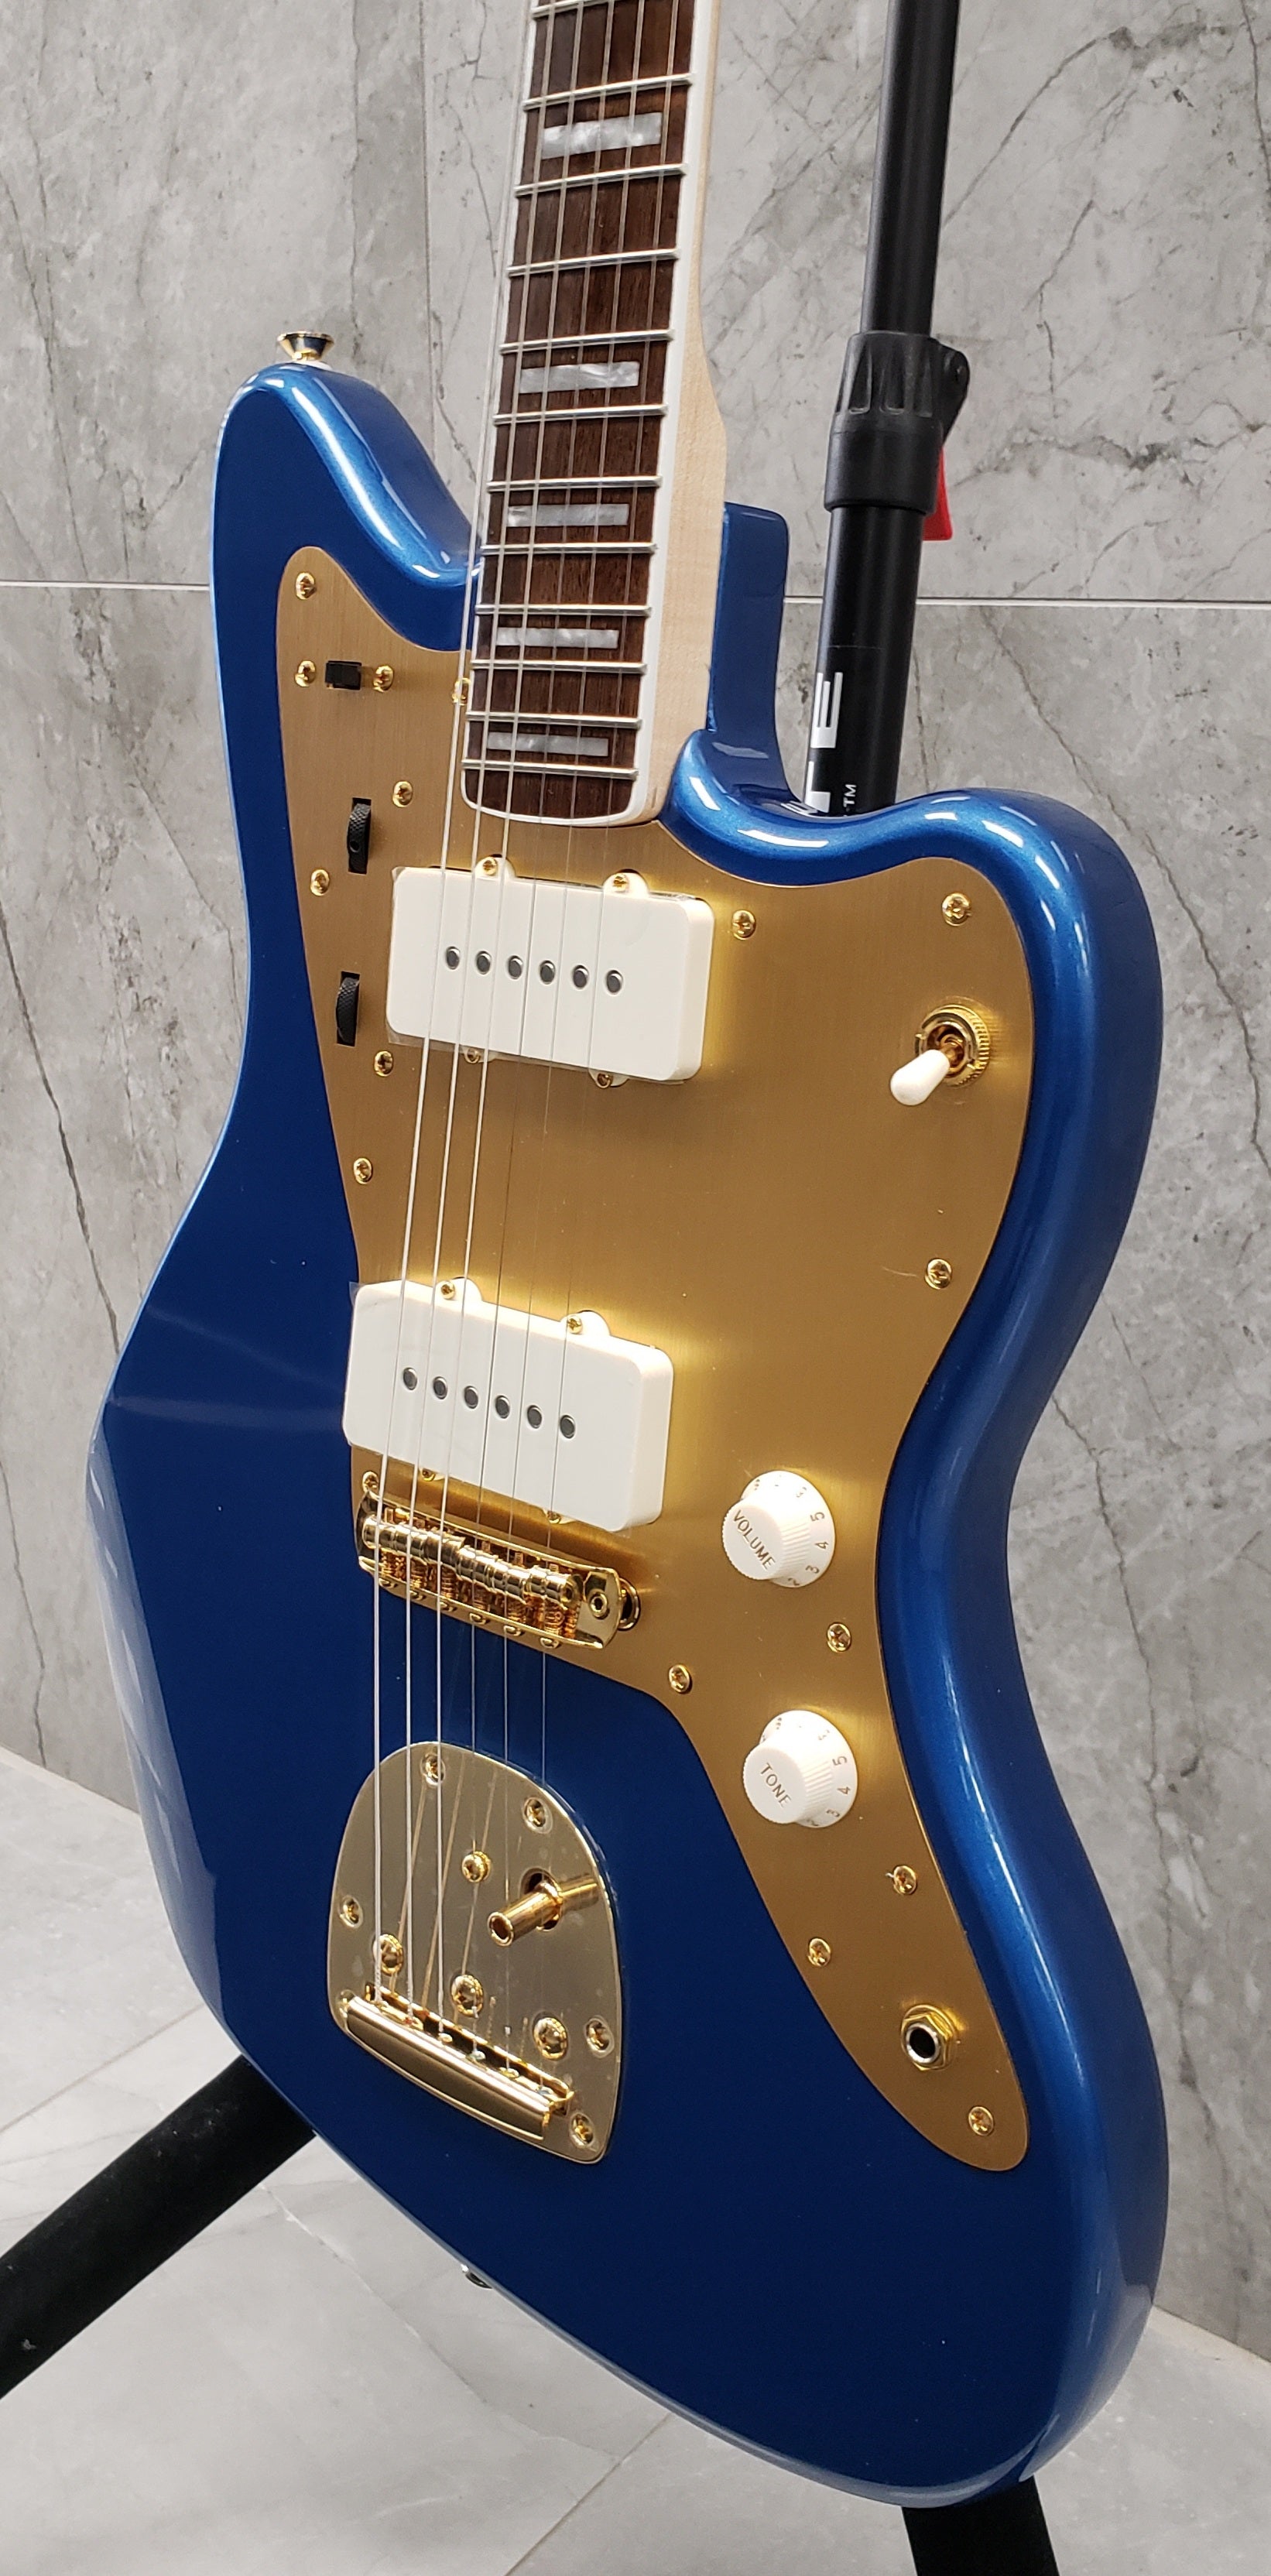 SQUIER 40th Anniversary Jazzmaster Gold Edition Gold Anodized Pickguard, Lake Placid Blue 0379420502 SERIAL NUMBER ICSA22046949 - 7.6 LBS